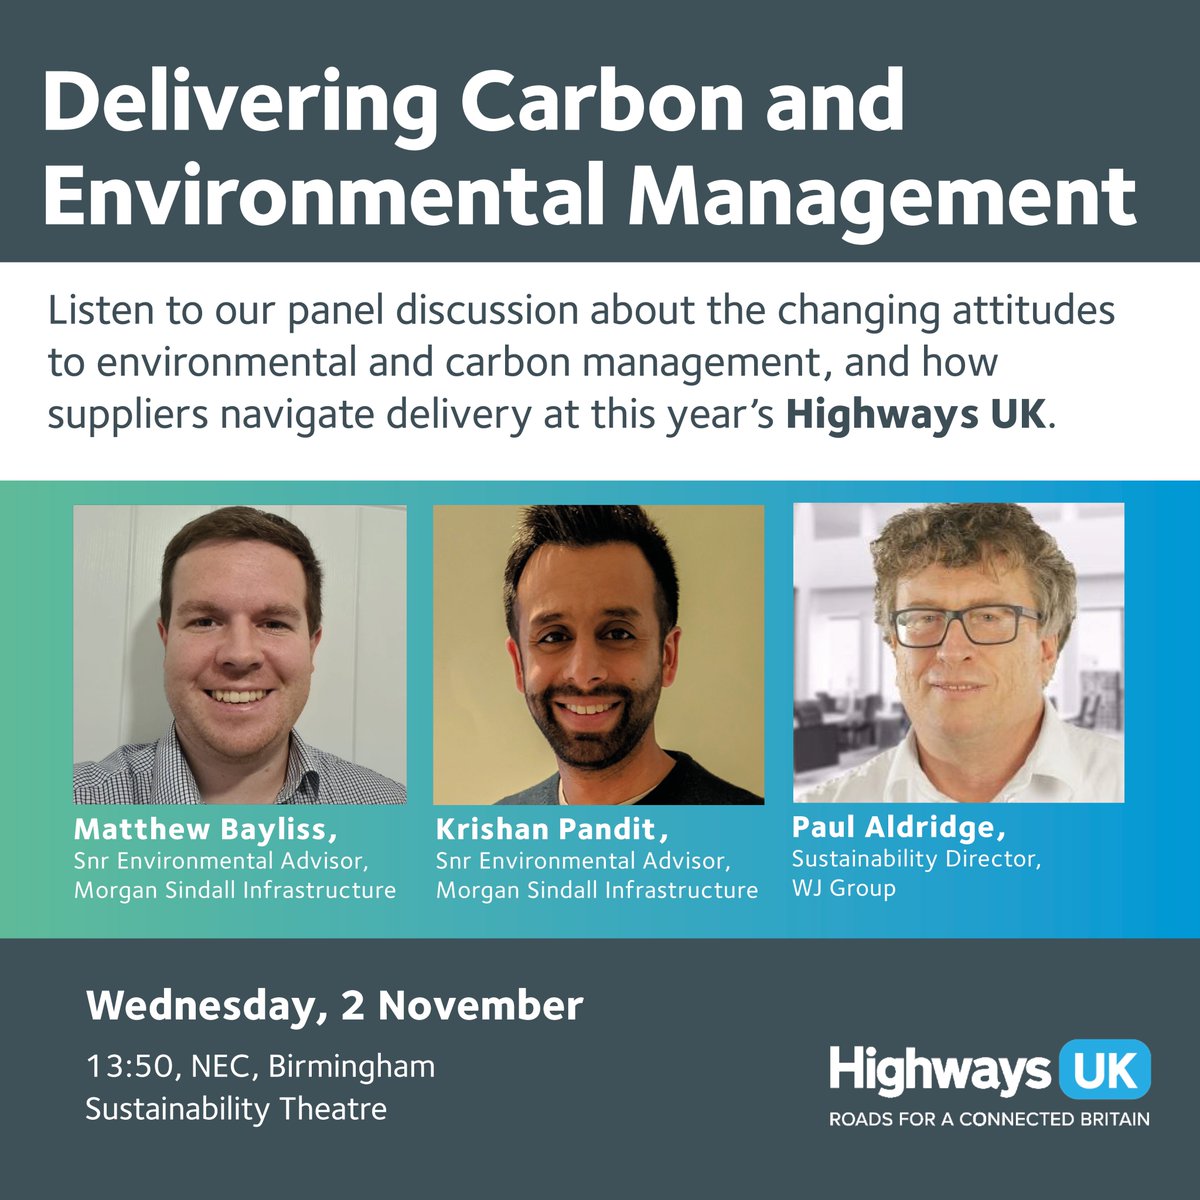 Our colleagues Matthew Bayliss and Krishan Pandit will be joined by Paul Aldridge from WJ Group to discuss the changing attitudes to environmental and carbon management and how suppliers navigate delivery at next week’s @HWYSUK event. Come and say hello to our team on stand G8👋